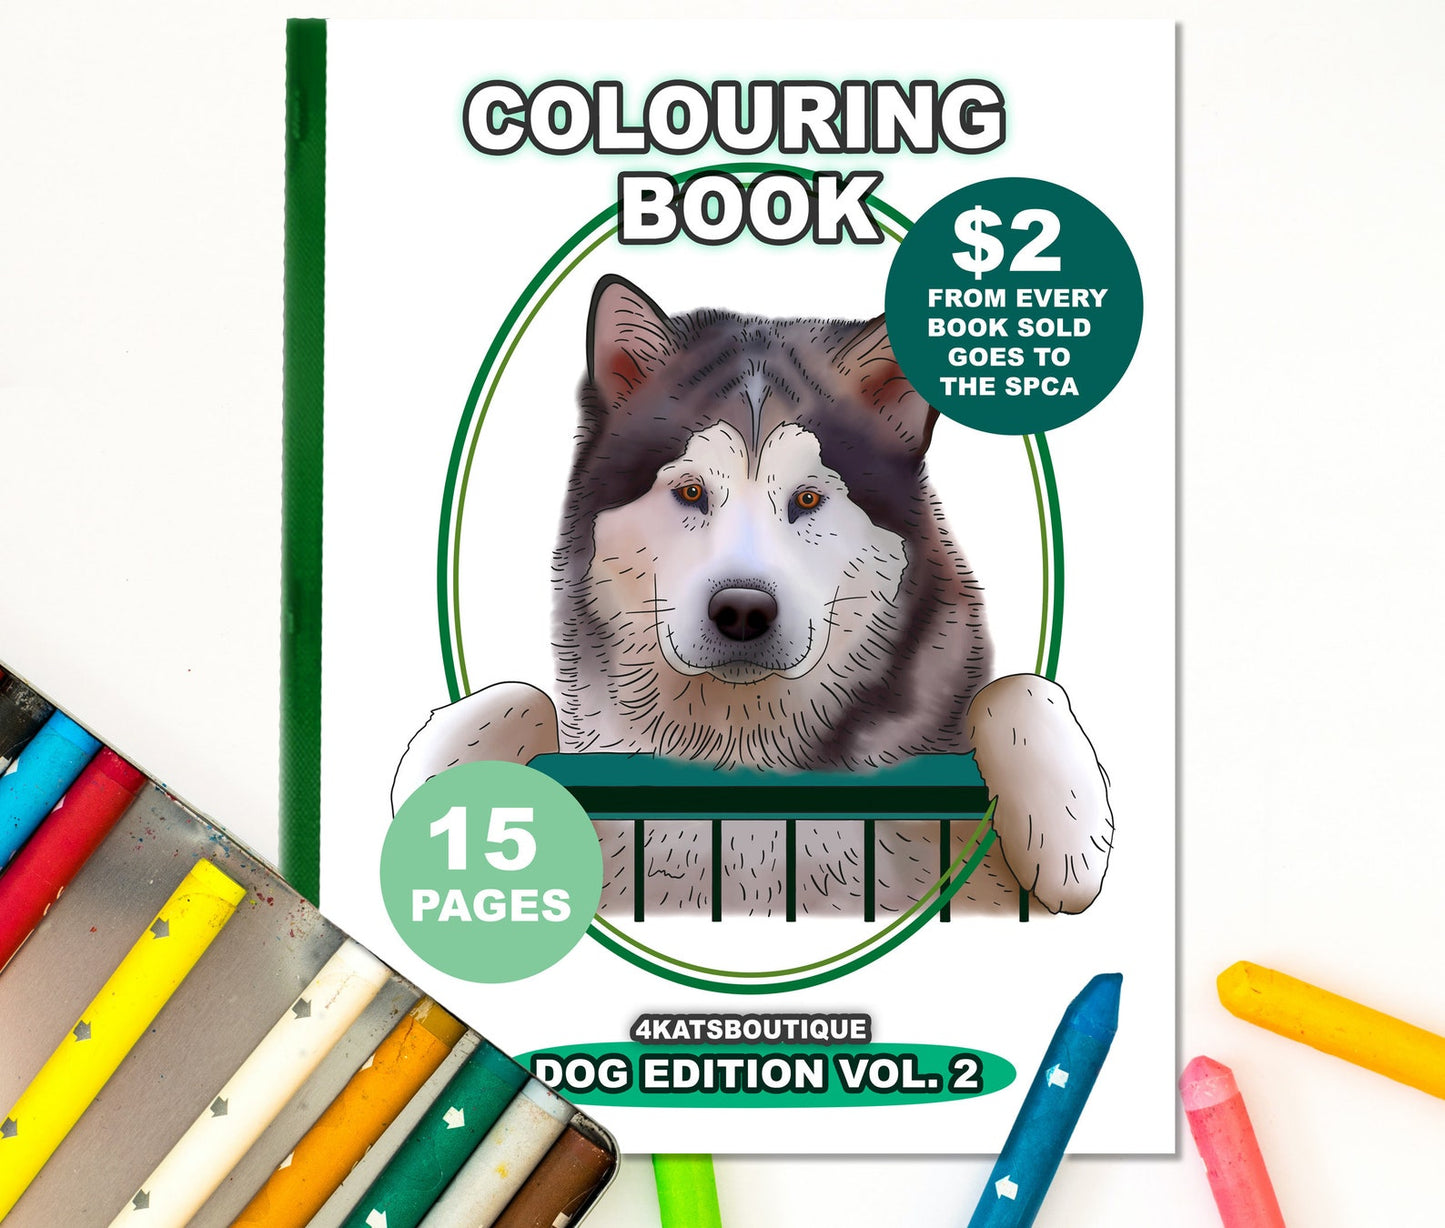 Dog Edition Vol. 2 - Charitable Colouring Book